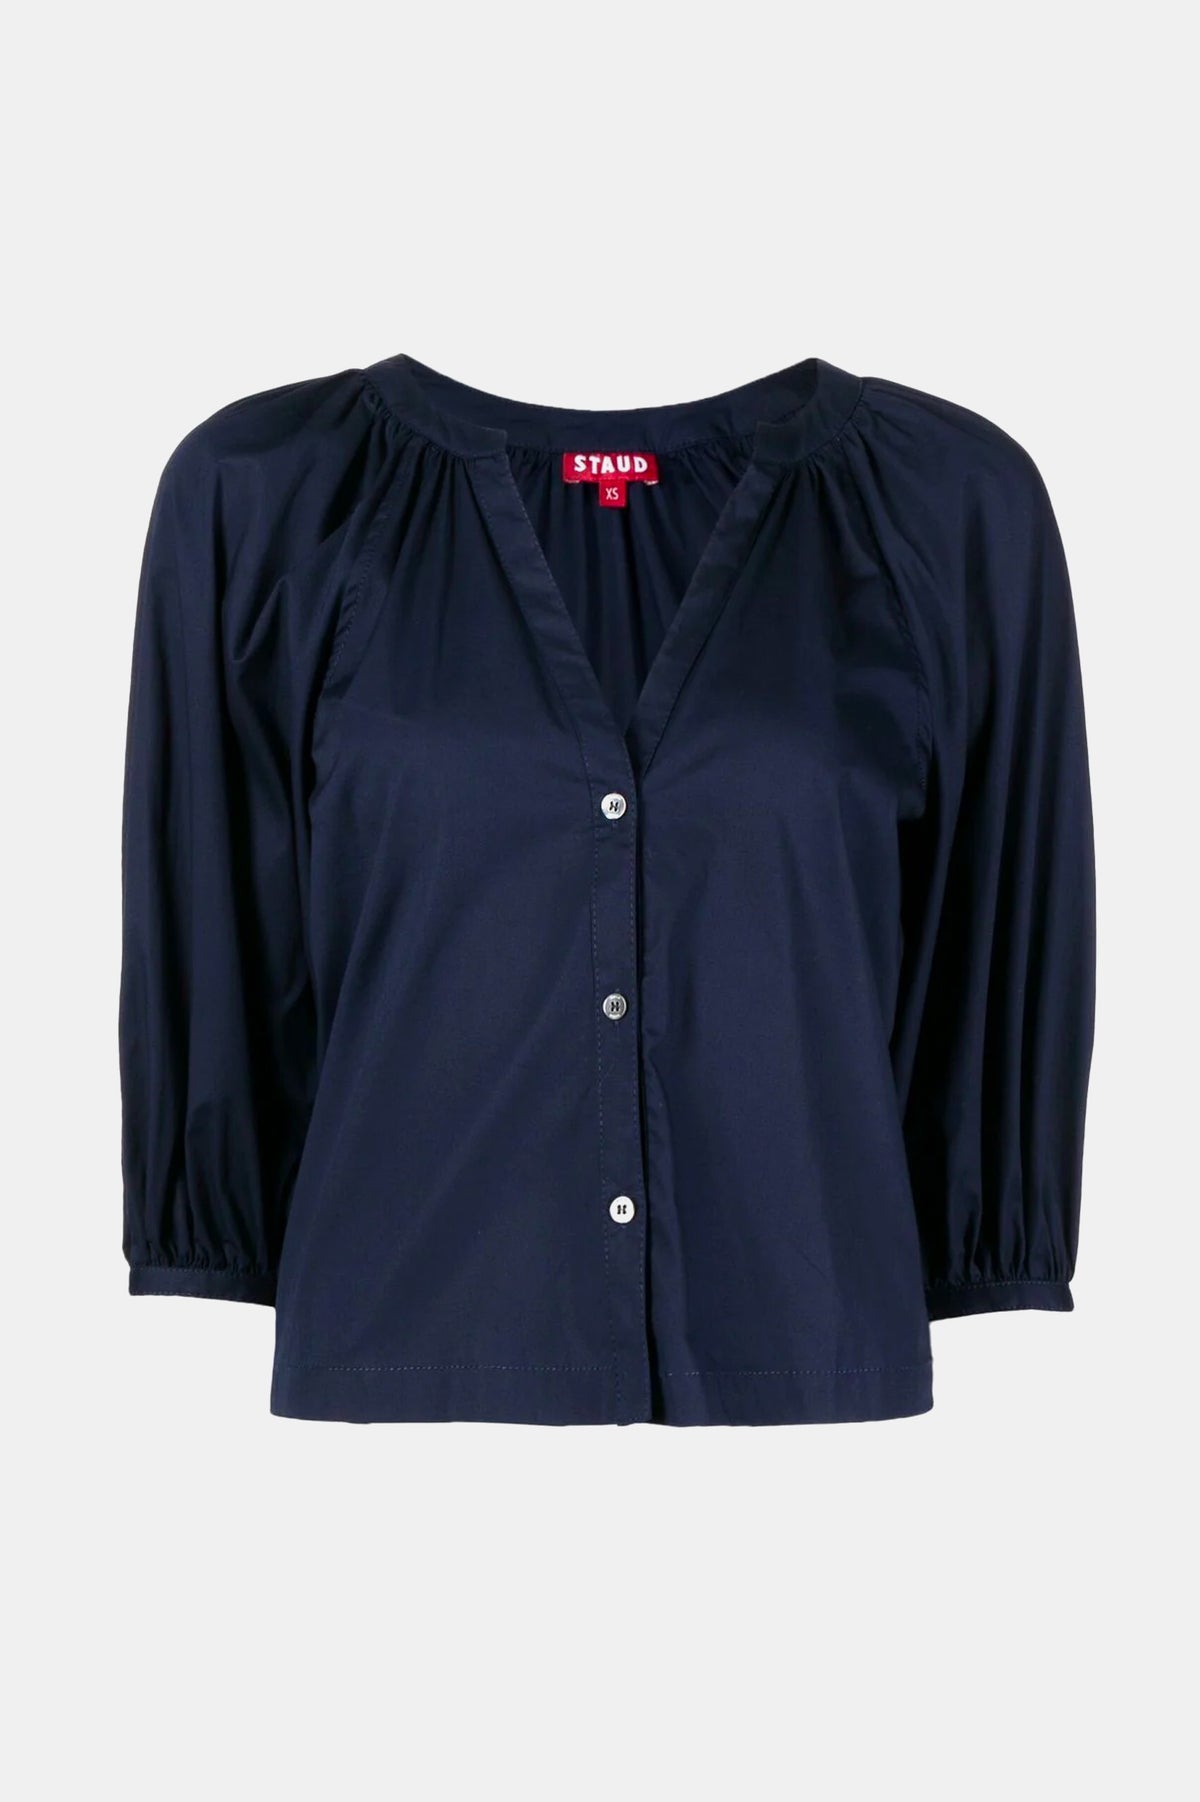 New Dill Top in Navy